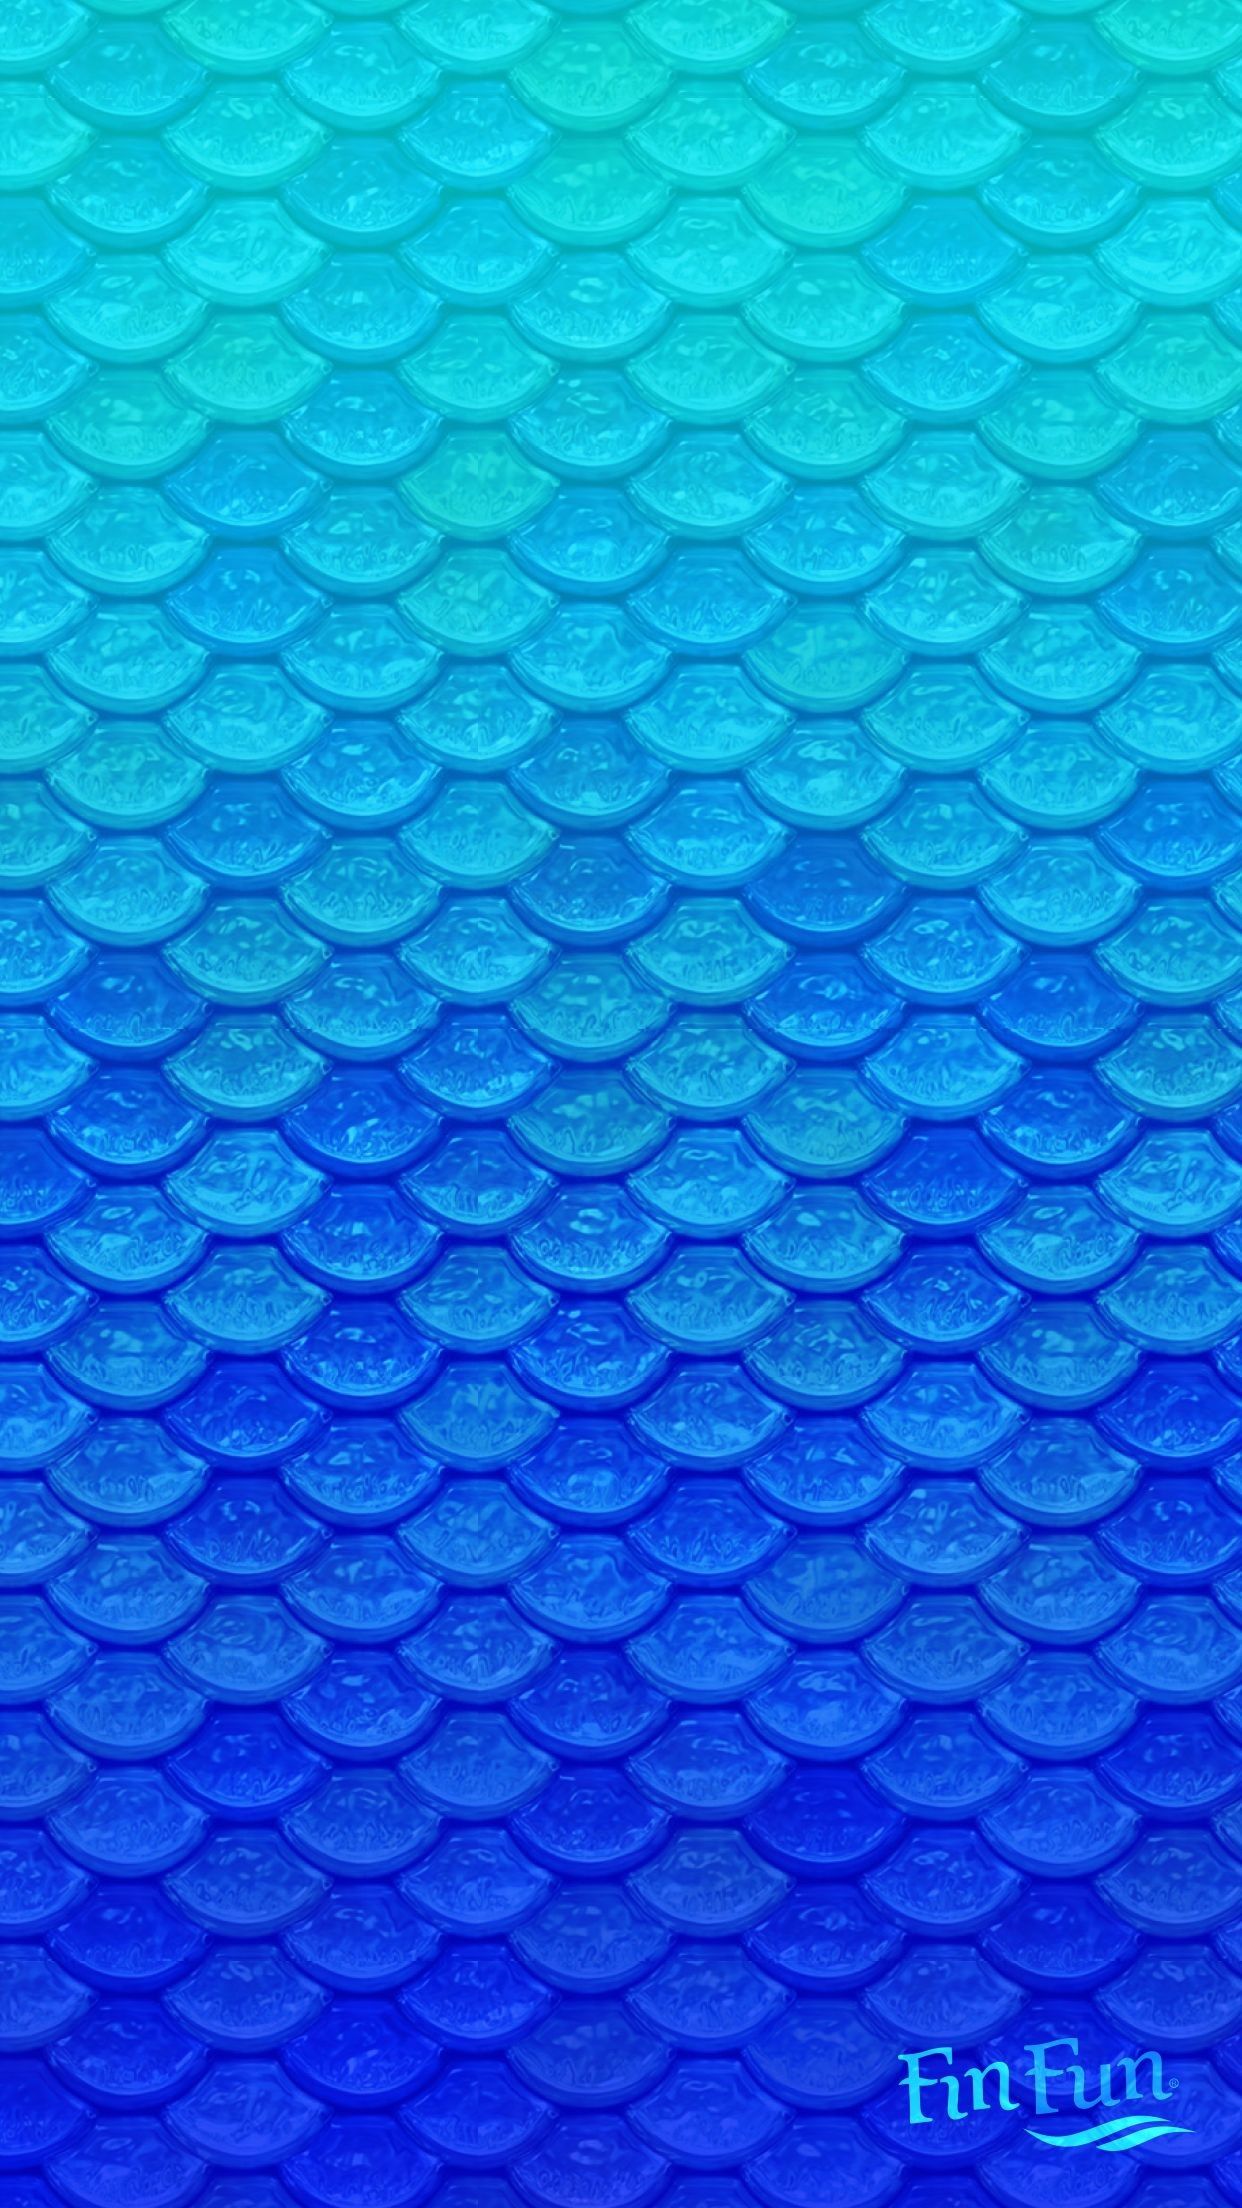 Mermaid Scales Wallpaper background picture